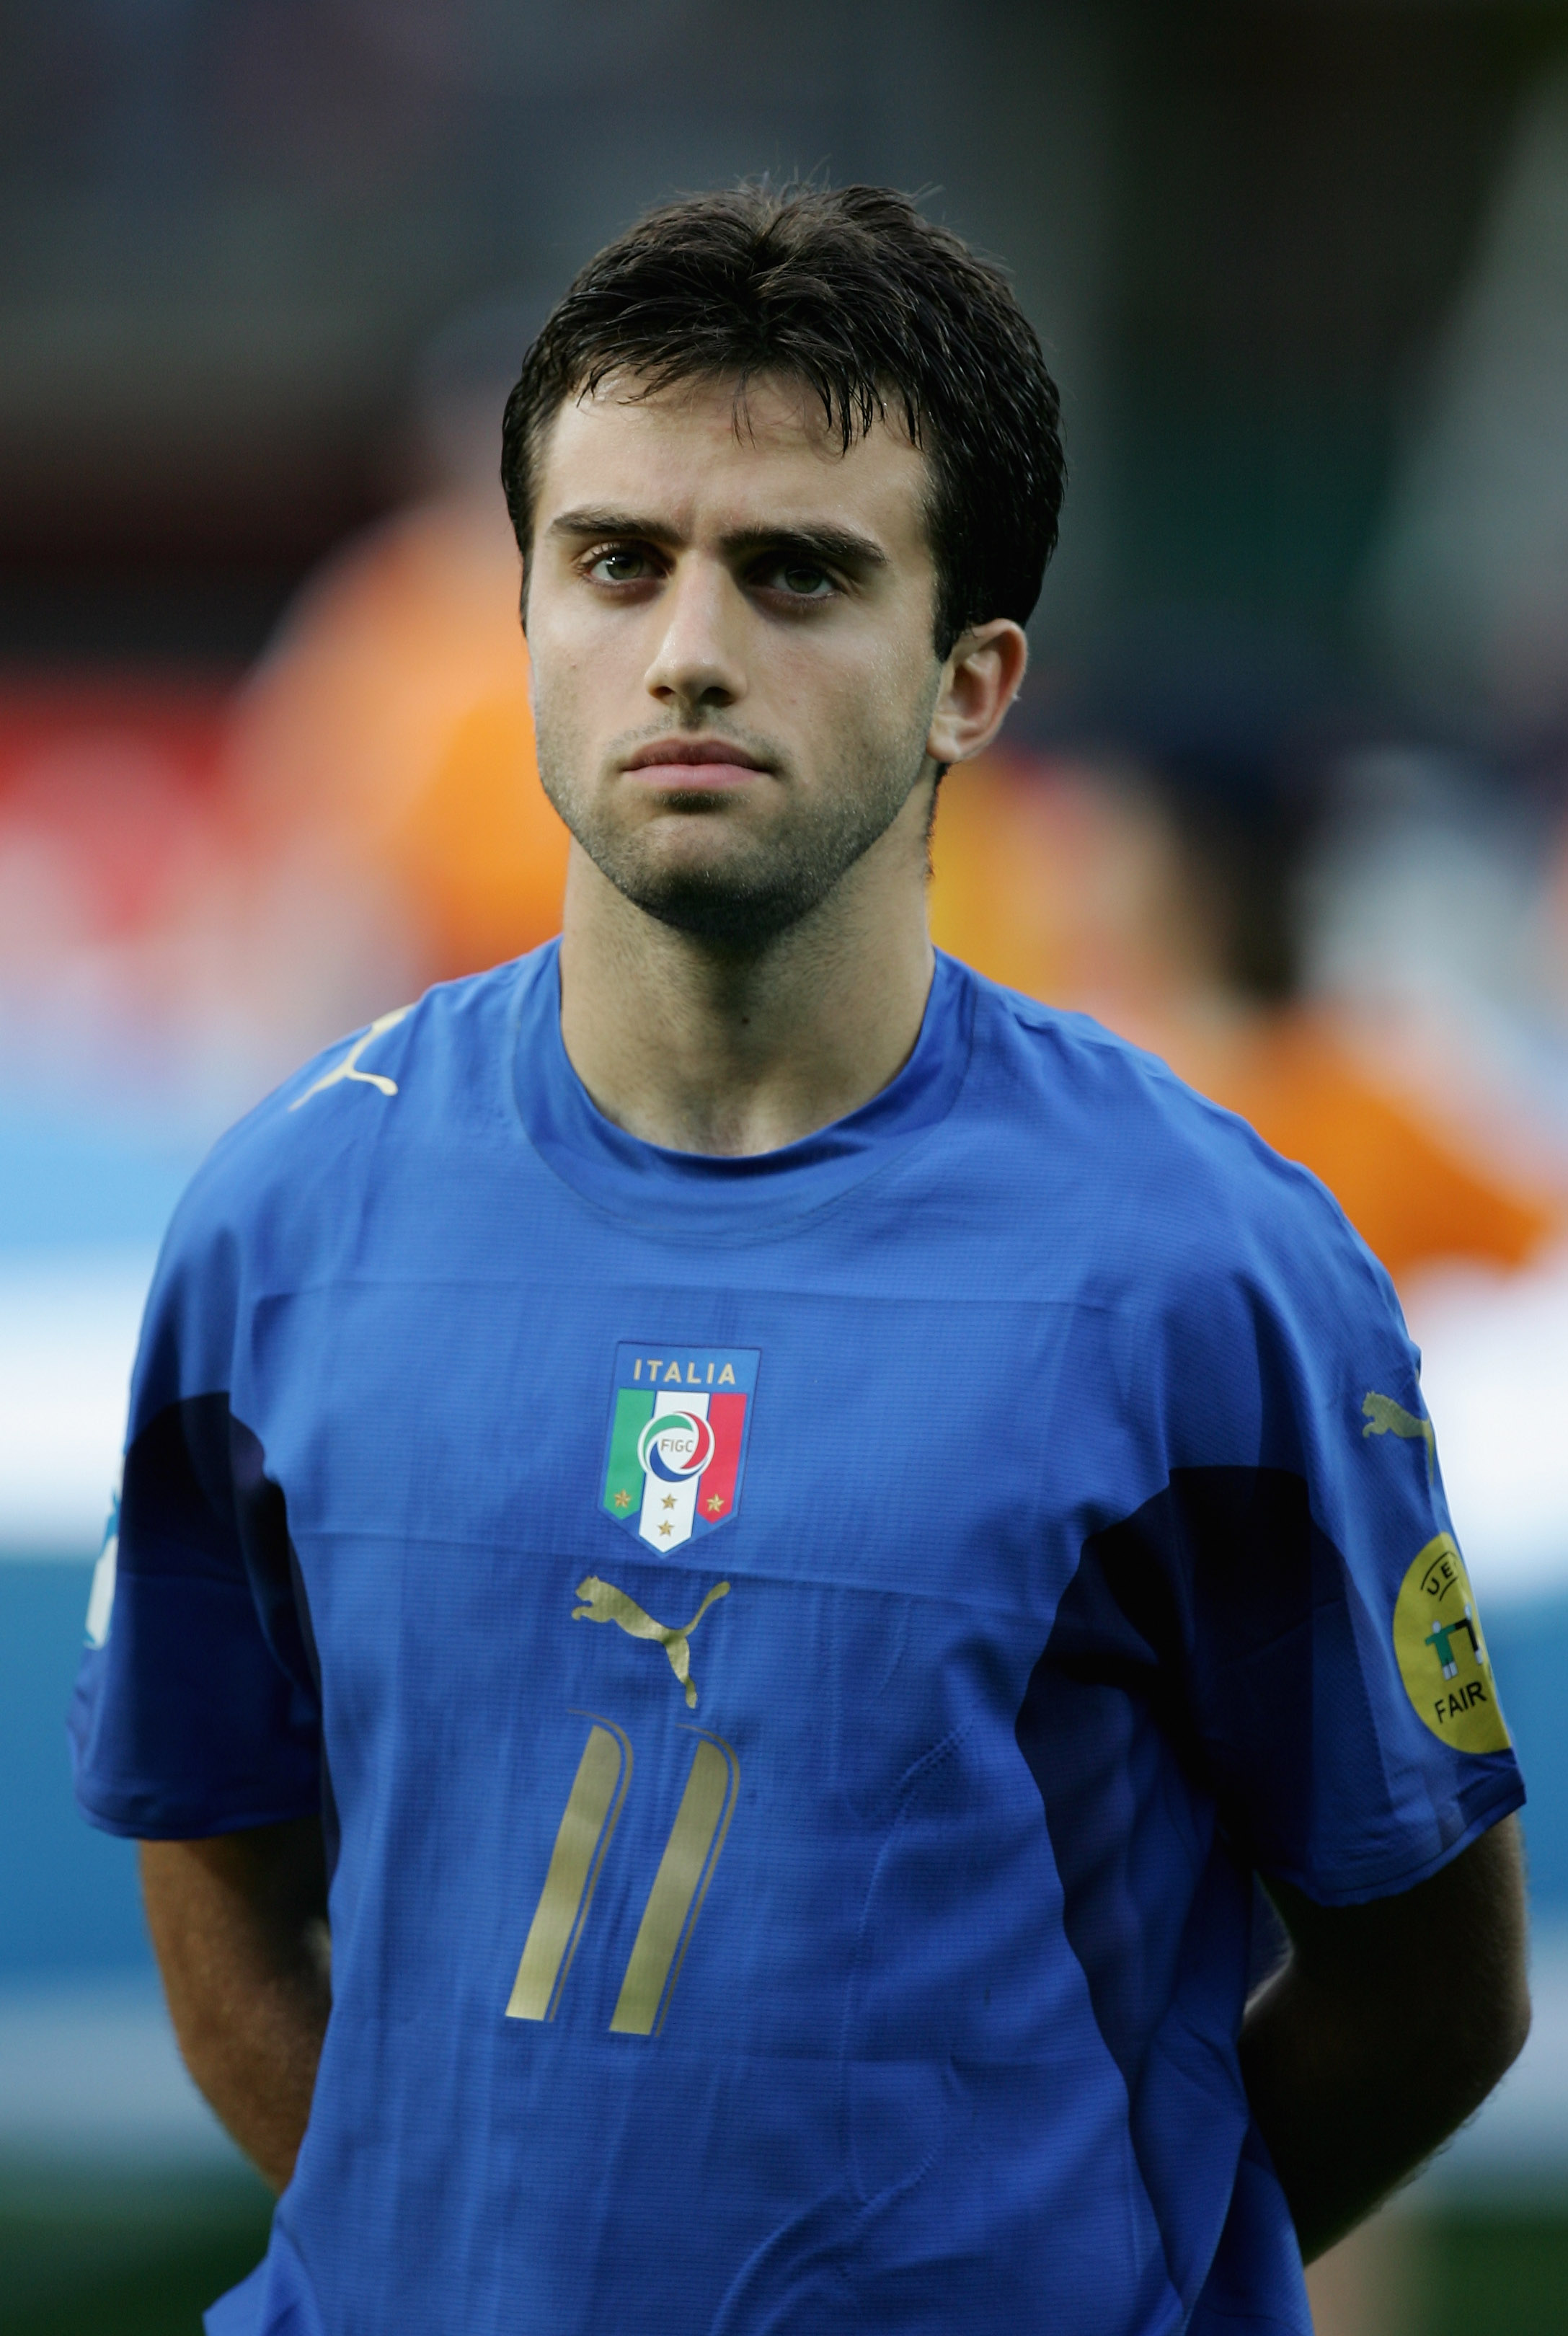 NIJMEGEN, NETHERLANDS - JUNE 21:  Guiseppe Rossi of Italy during the UEFA U21 Championship Olympic play-off match between Portugal U21 and Italy U21 at the Goffert Stadium on June 21, 2007 in Nijmegen, Netherlands.  (Photo by Christopher Lee/Getty Images)